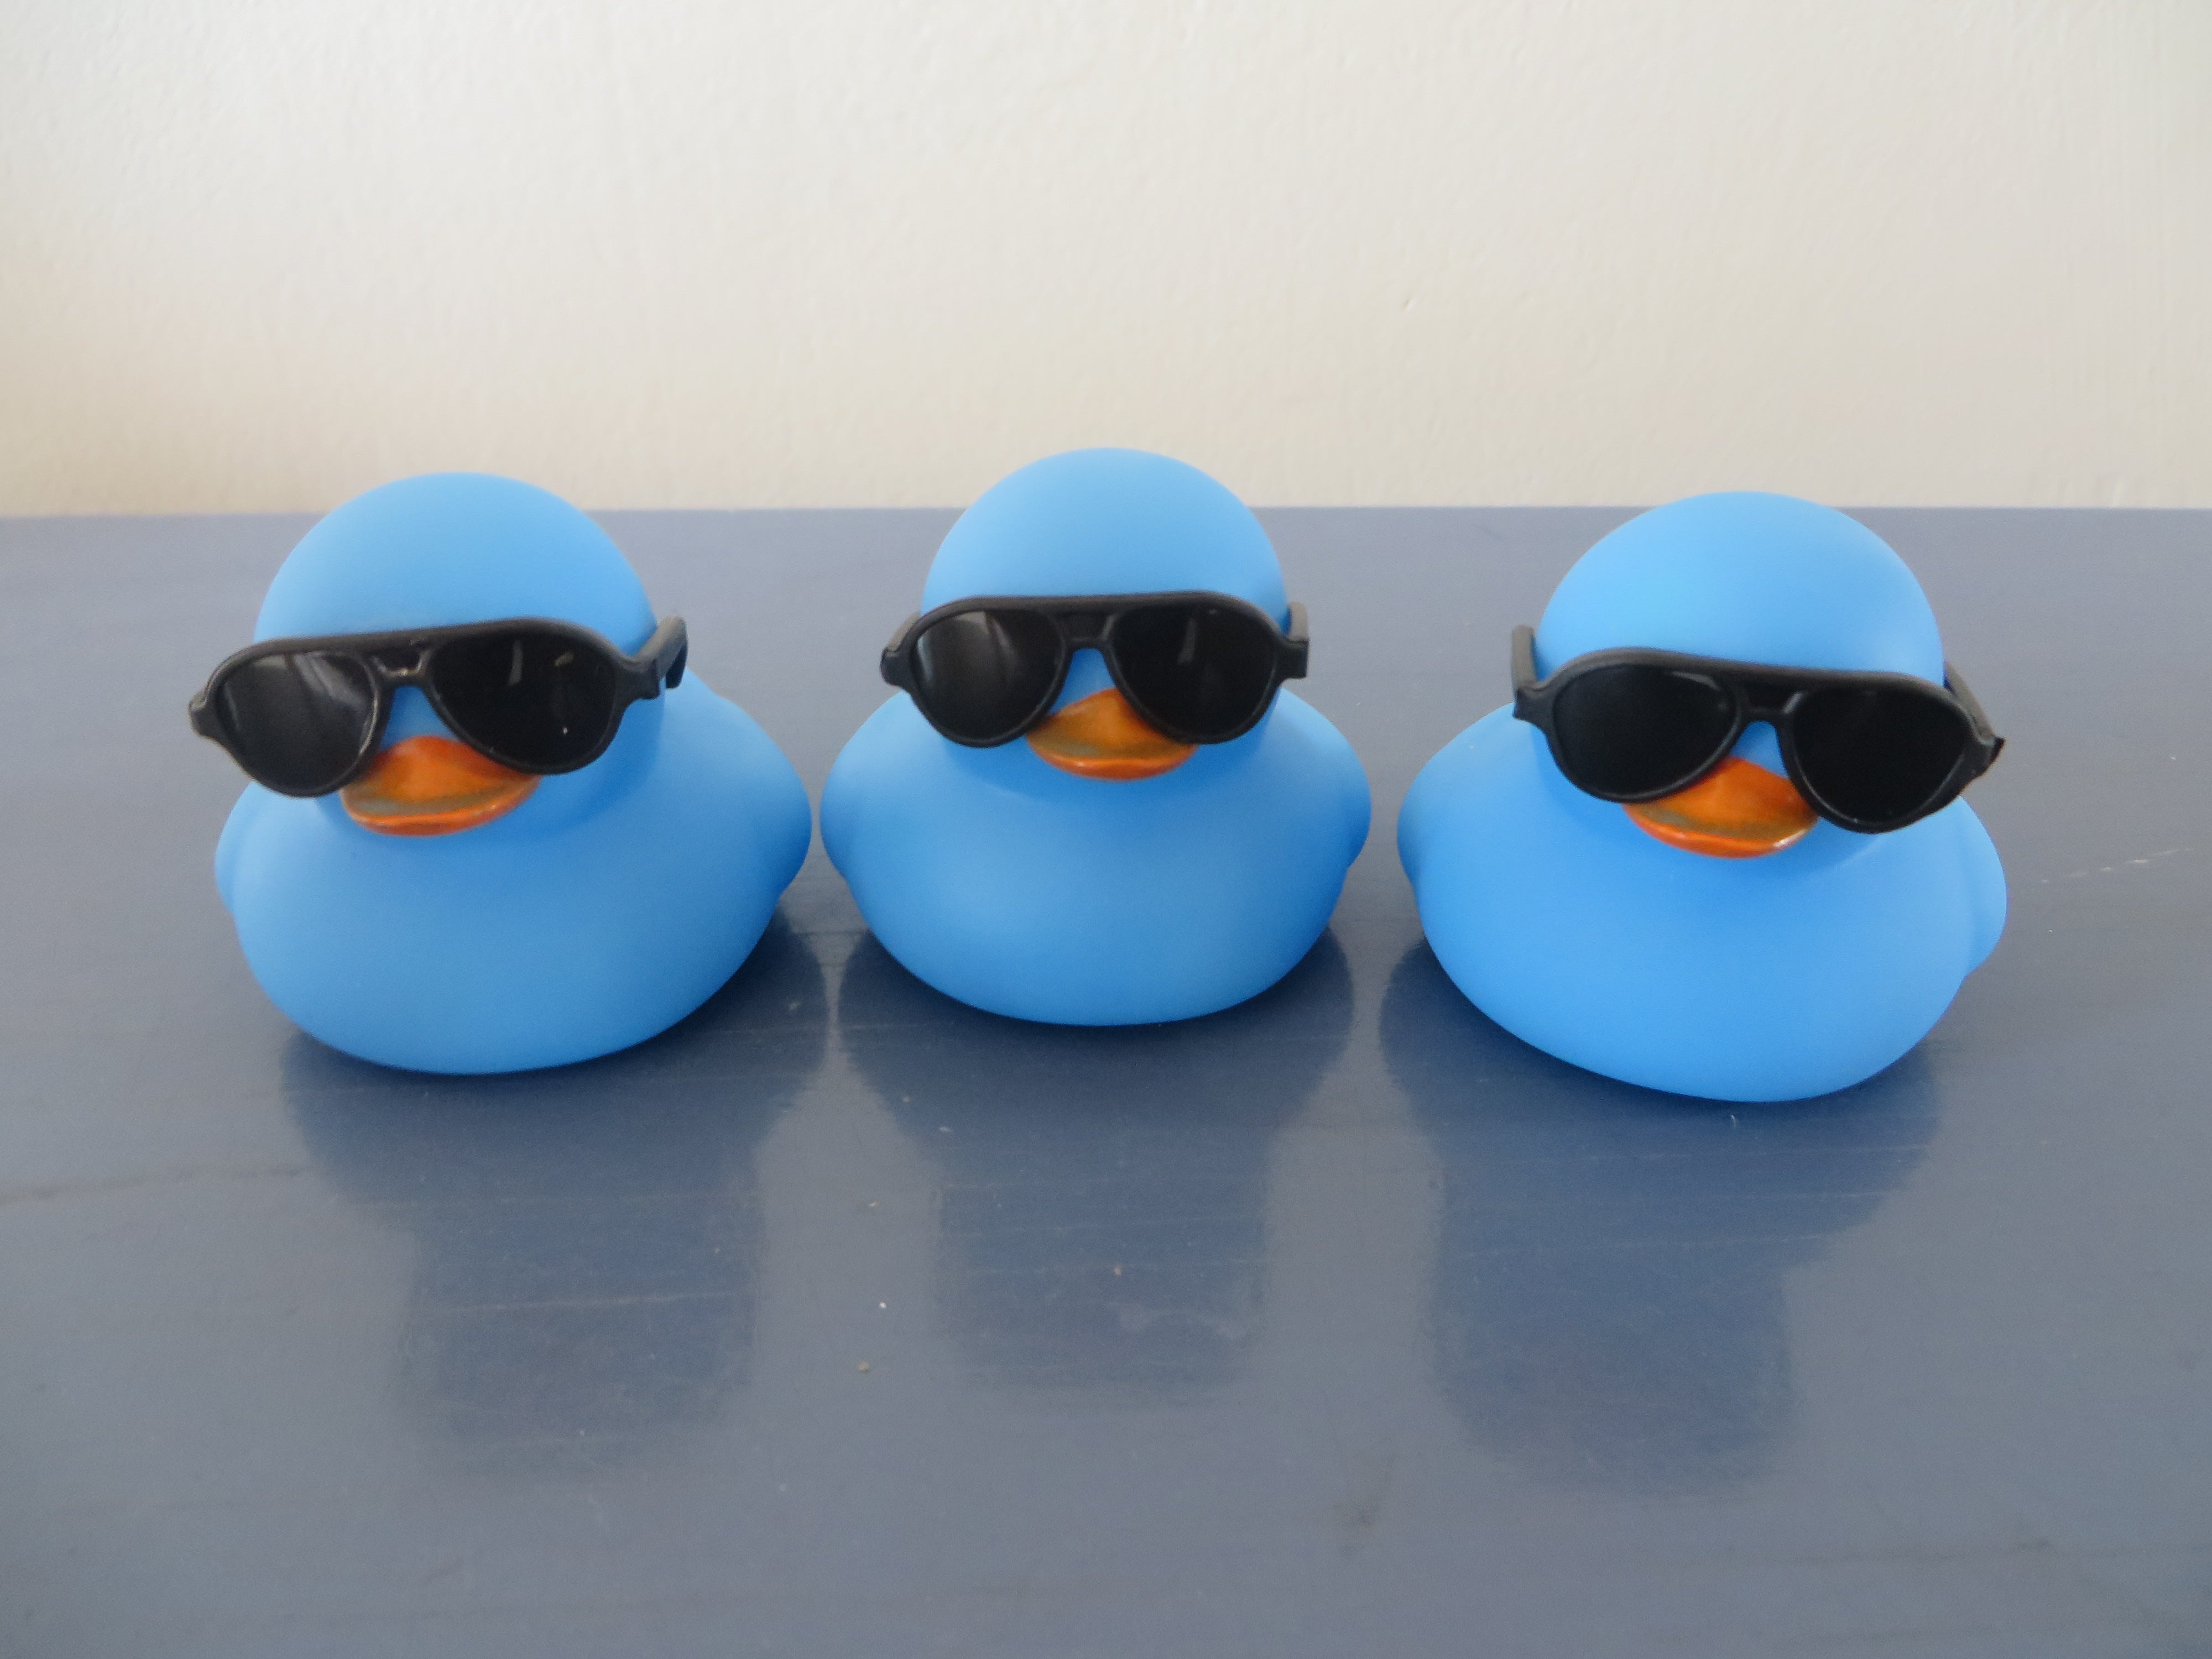 Buy Surfer Rubber Duck with Sunglasses | Essex Duck™ | Essex Duck